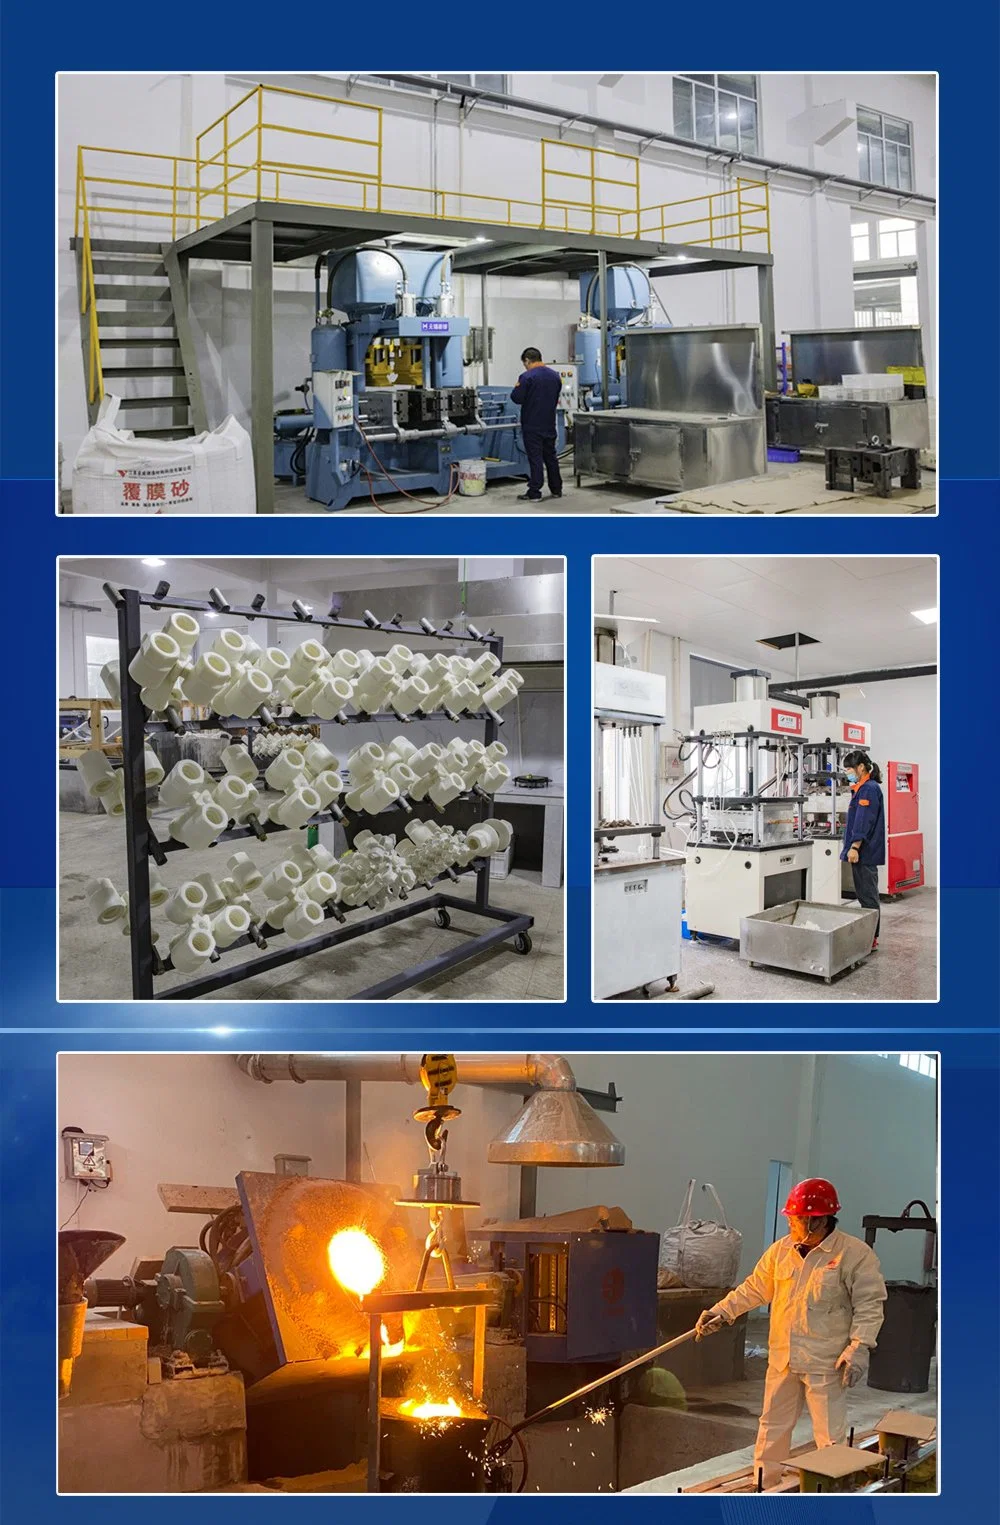 Machining,Forging,Stamping,Accessories,Decoration,Component,Construction,Warehouse,Basement,Wire System,Hanging,Lighting,Basement,Mating Facility,Hot Galvanized